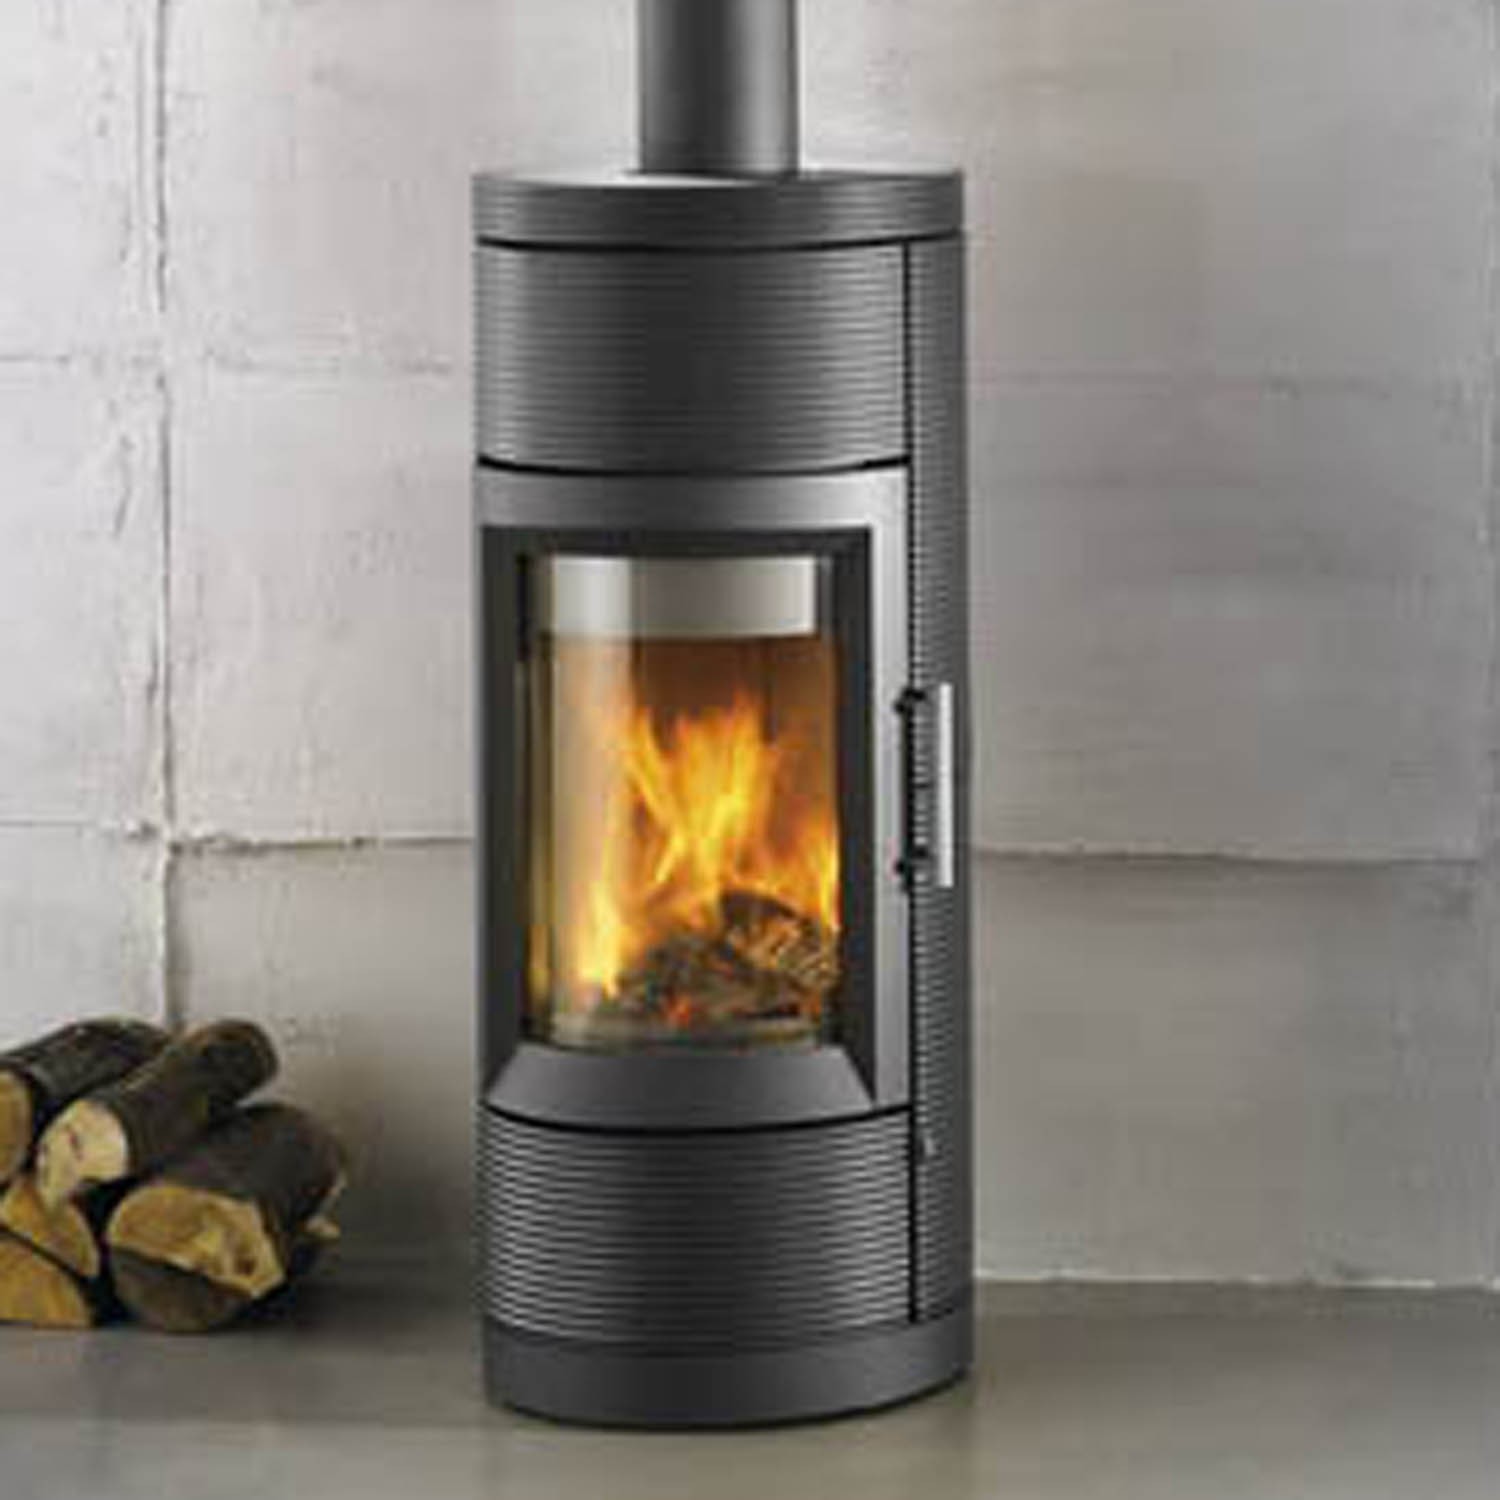 Lima 8150 Wood Stove in black, round, wood to the left, concrete flooring and concrete wall in the background.